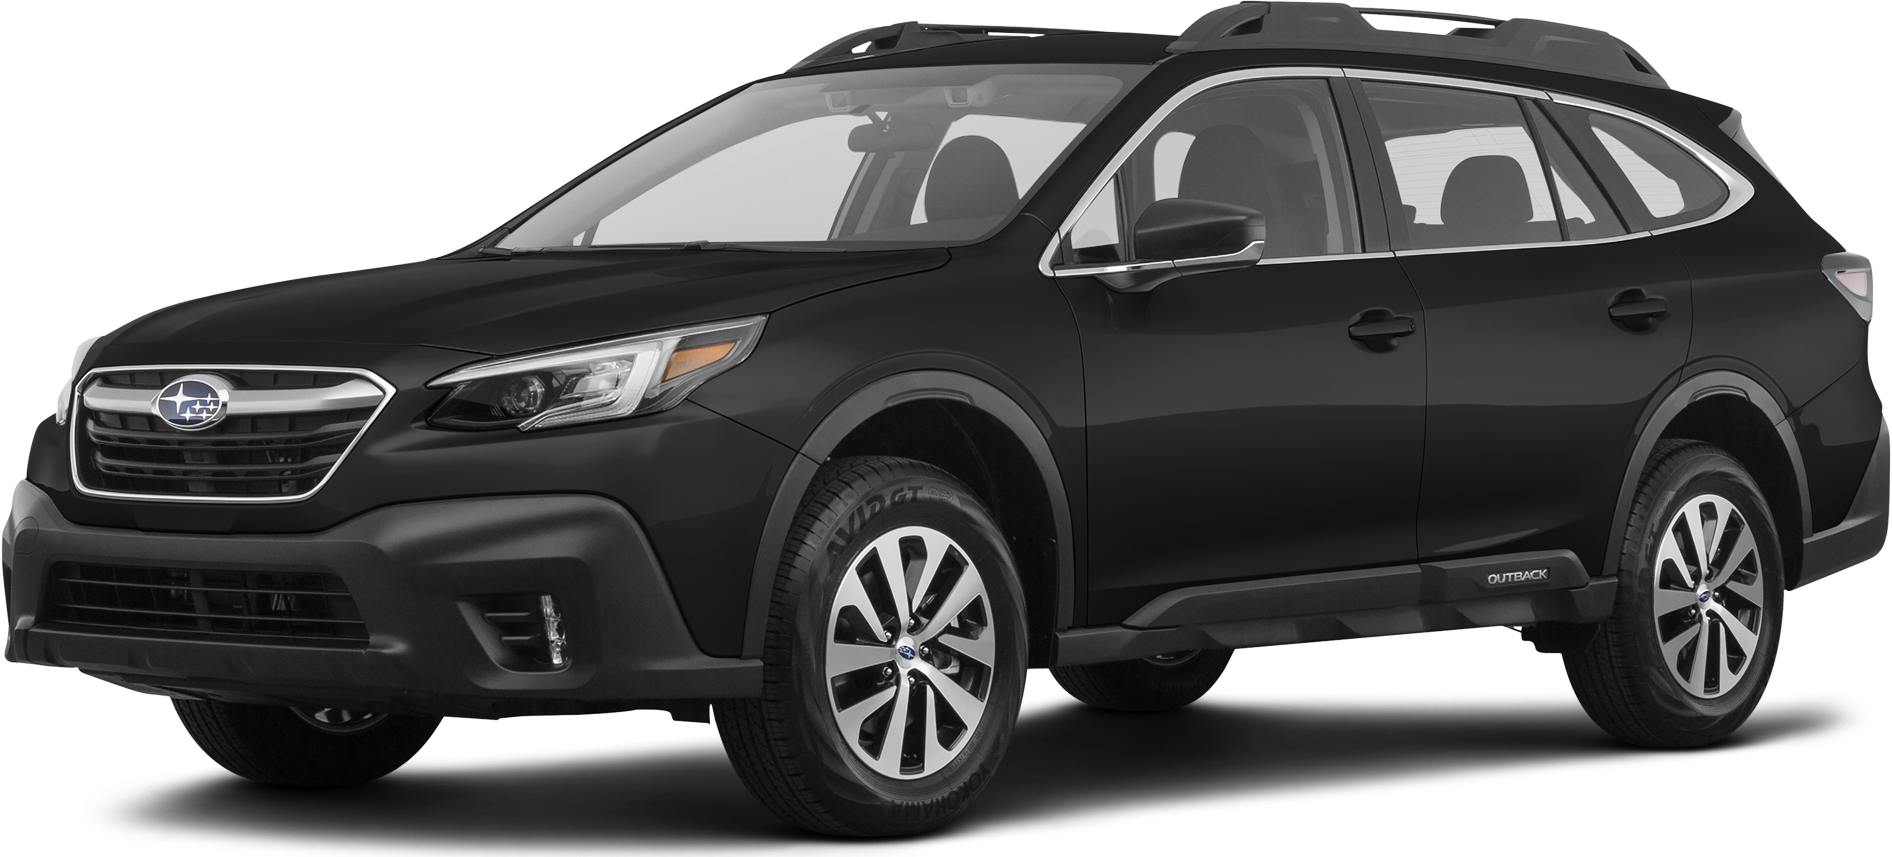 2022 Subaru Outback Price, Reviews, Pictures & More Kelley Blue Book